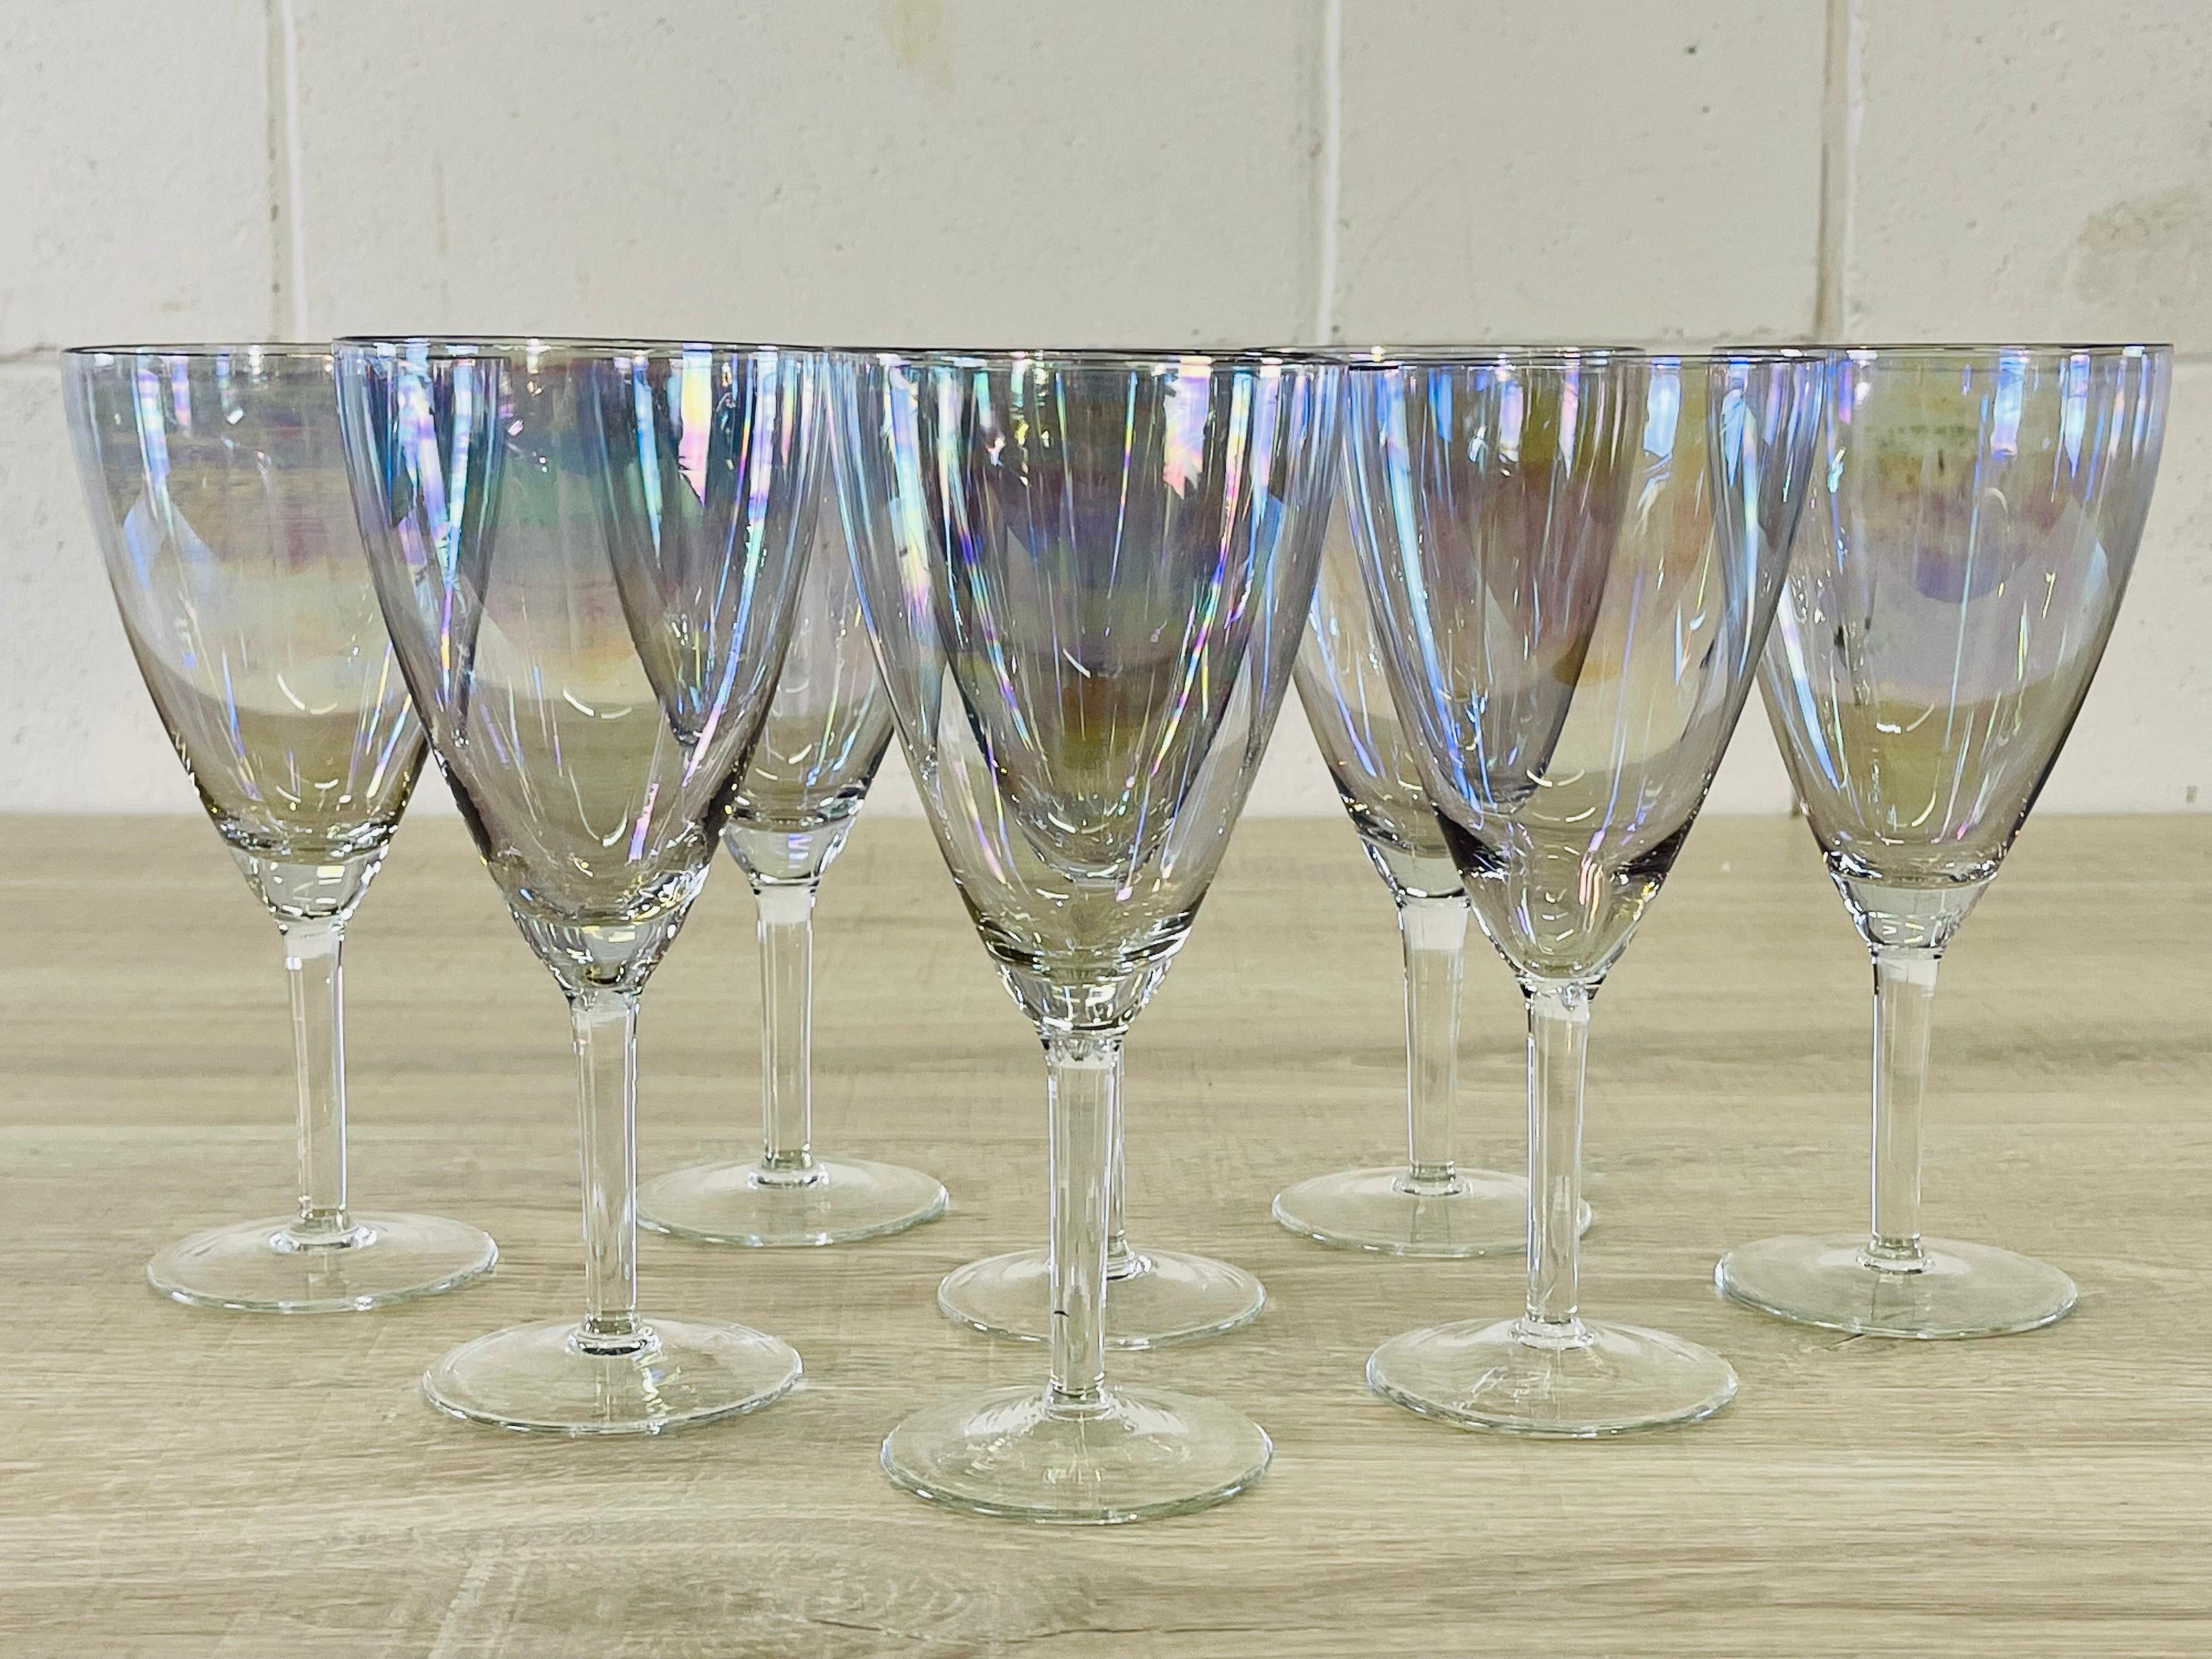 Vintage 1960s set of 8 iridescent glass water stems. No marks.